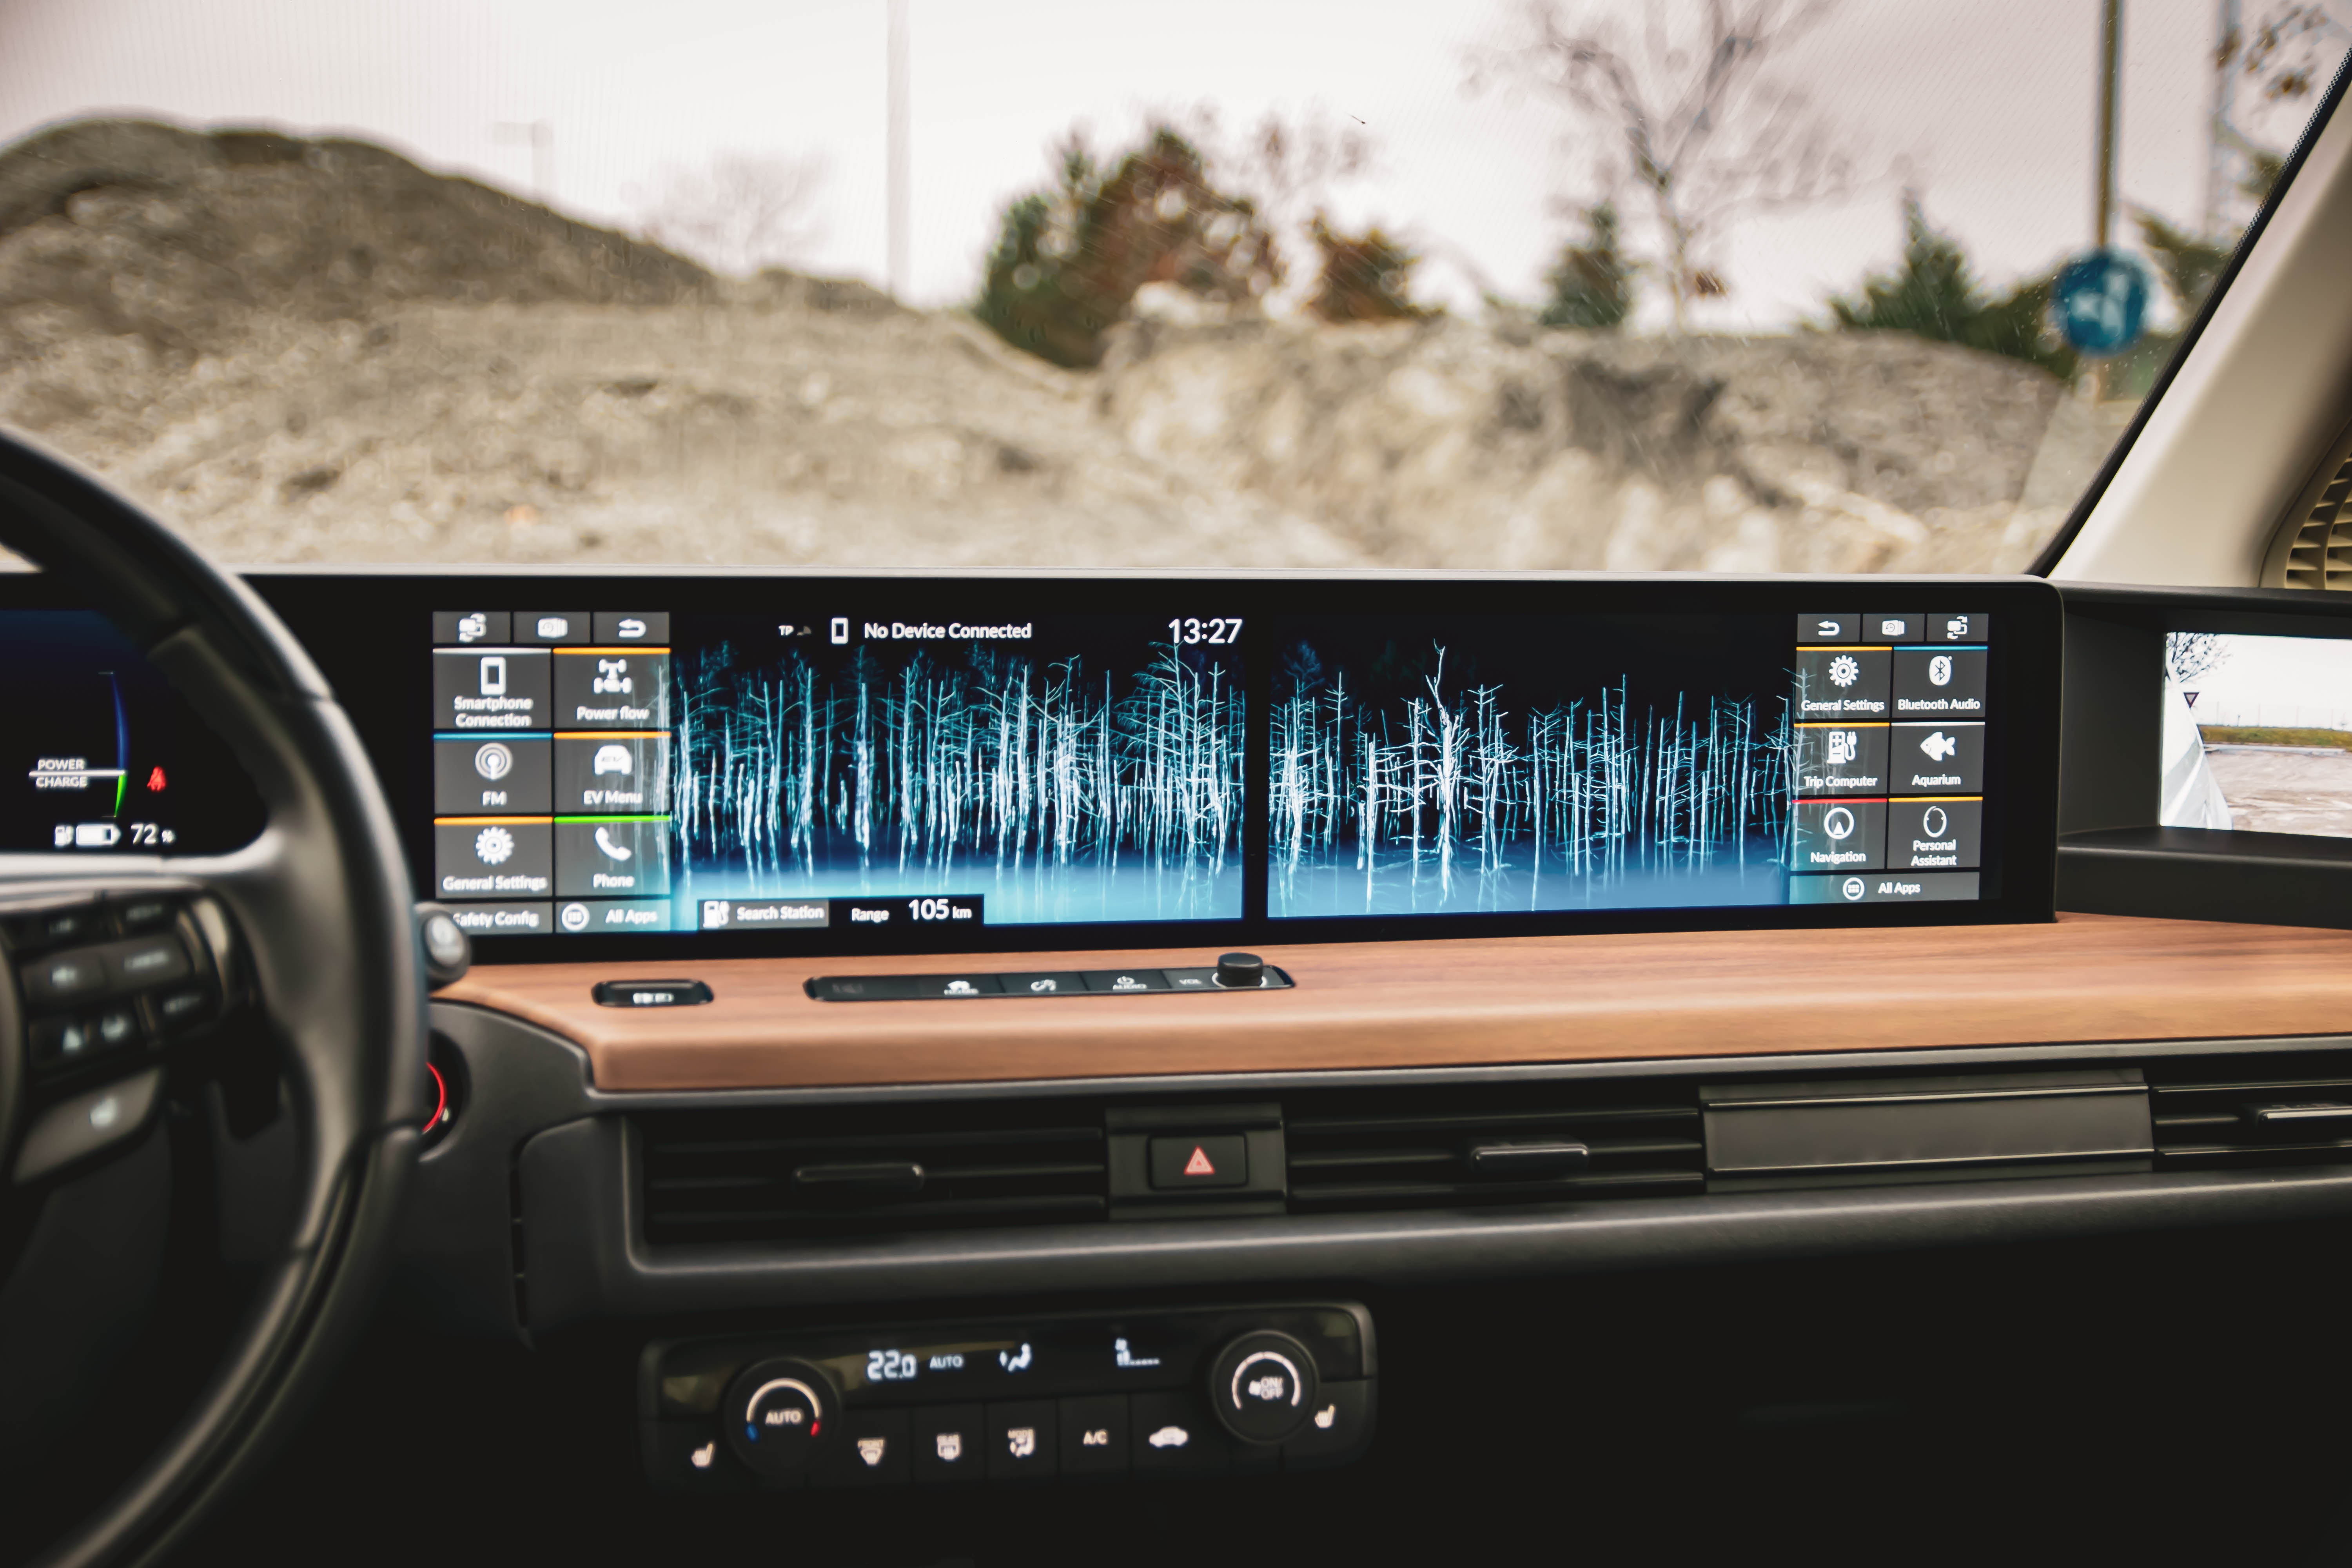 Top 5 electric car infotainment systems